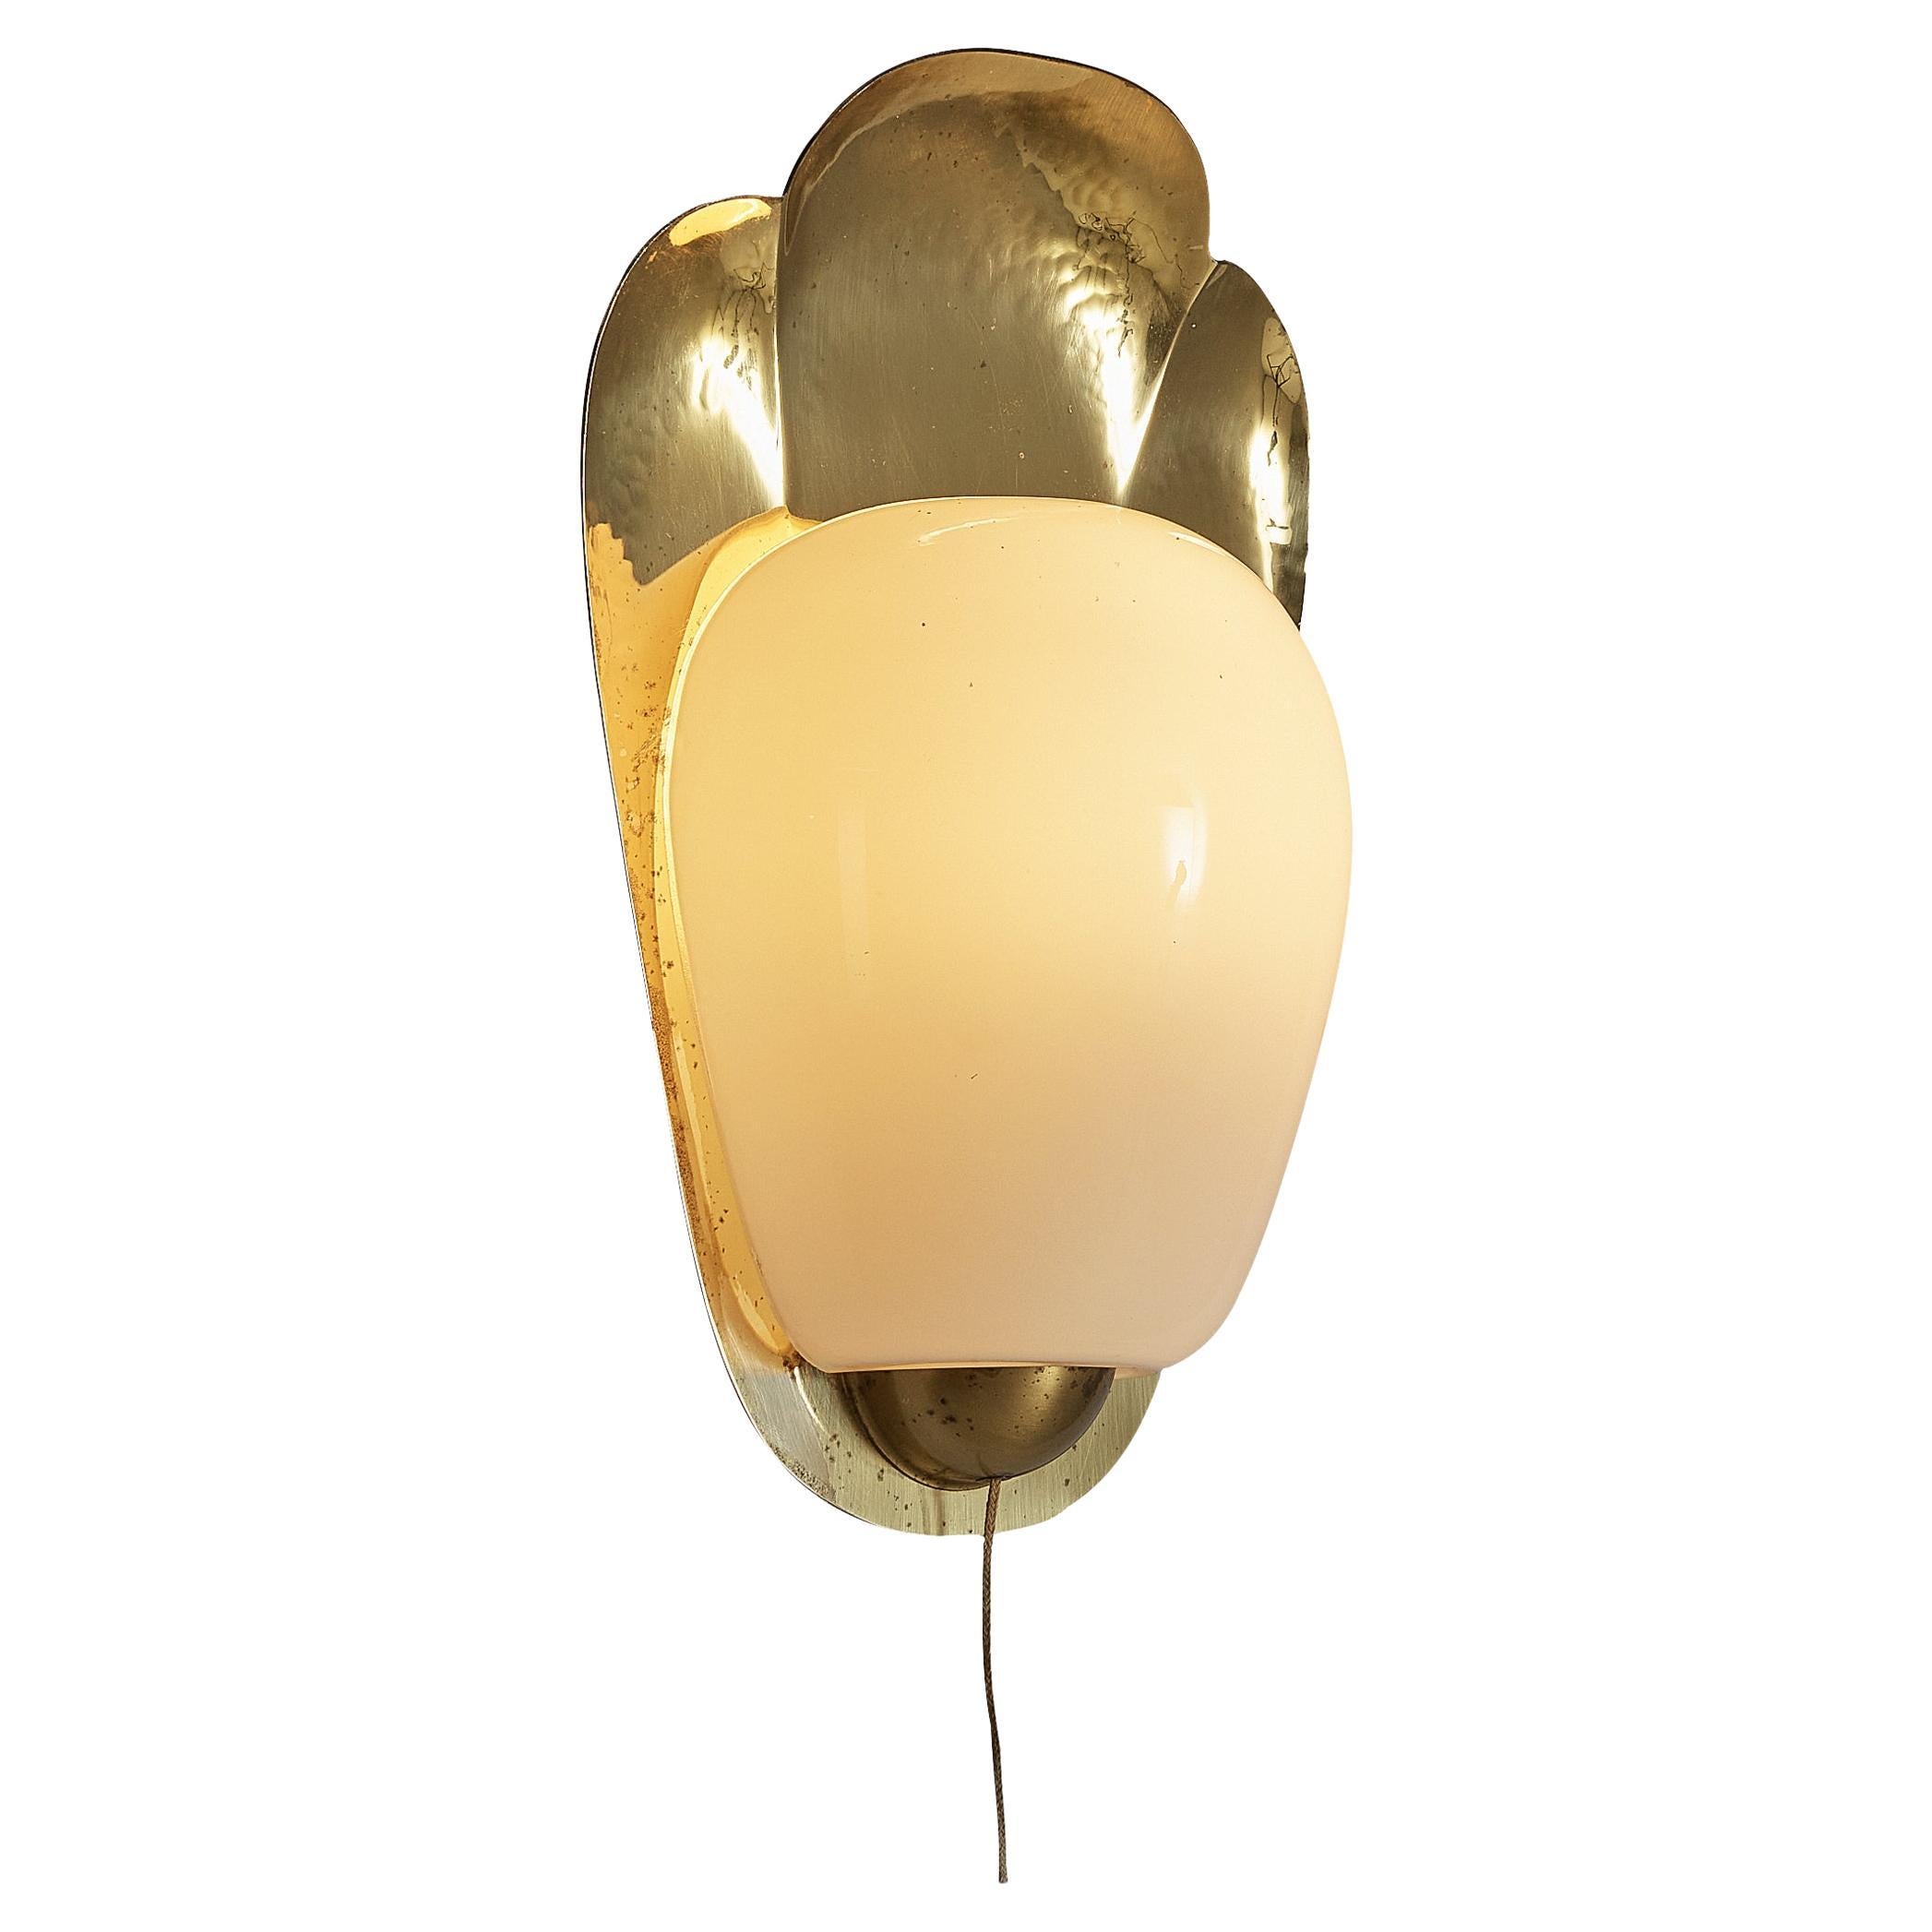 Charming Wall Light in Brass and Glass